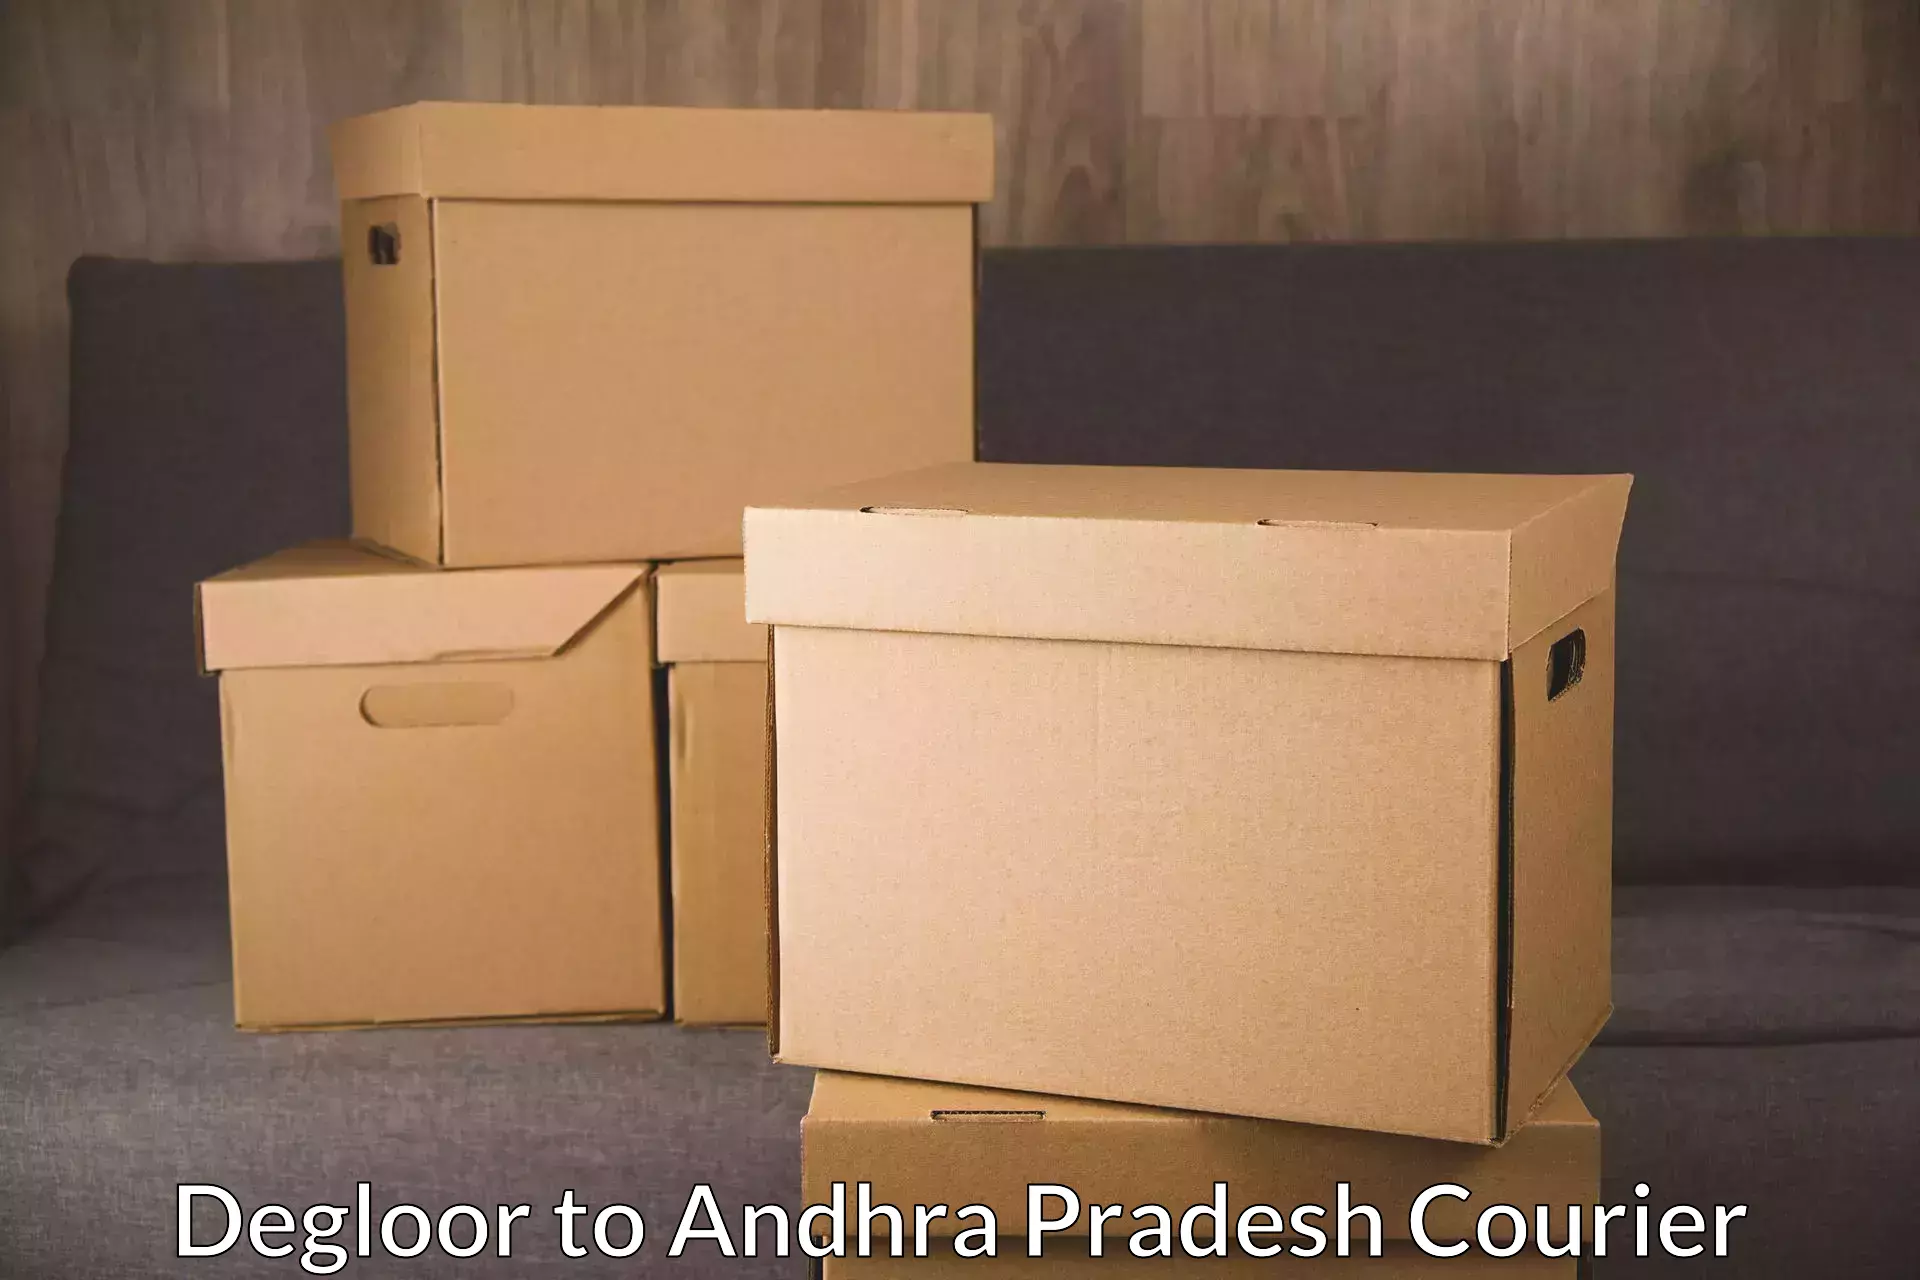 Next-day delivery options Degloor to Andhra Pradesh